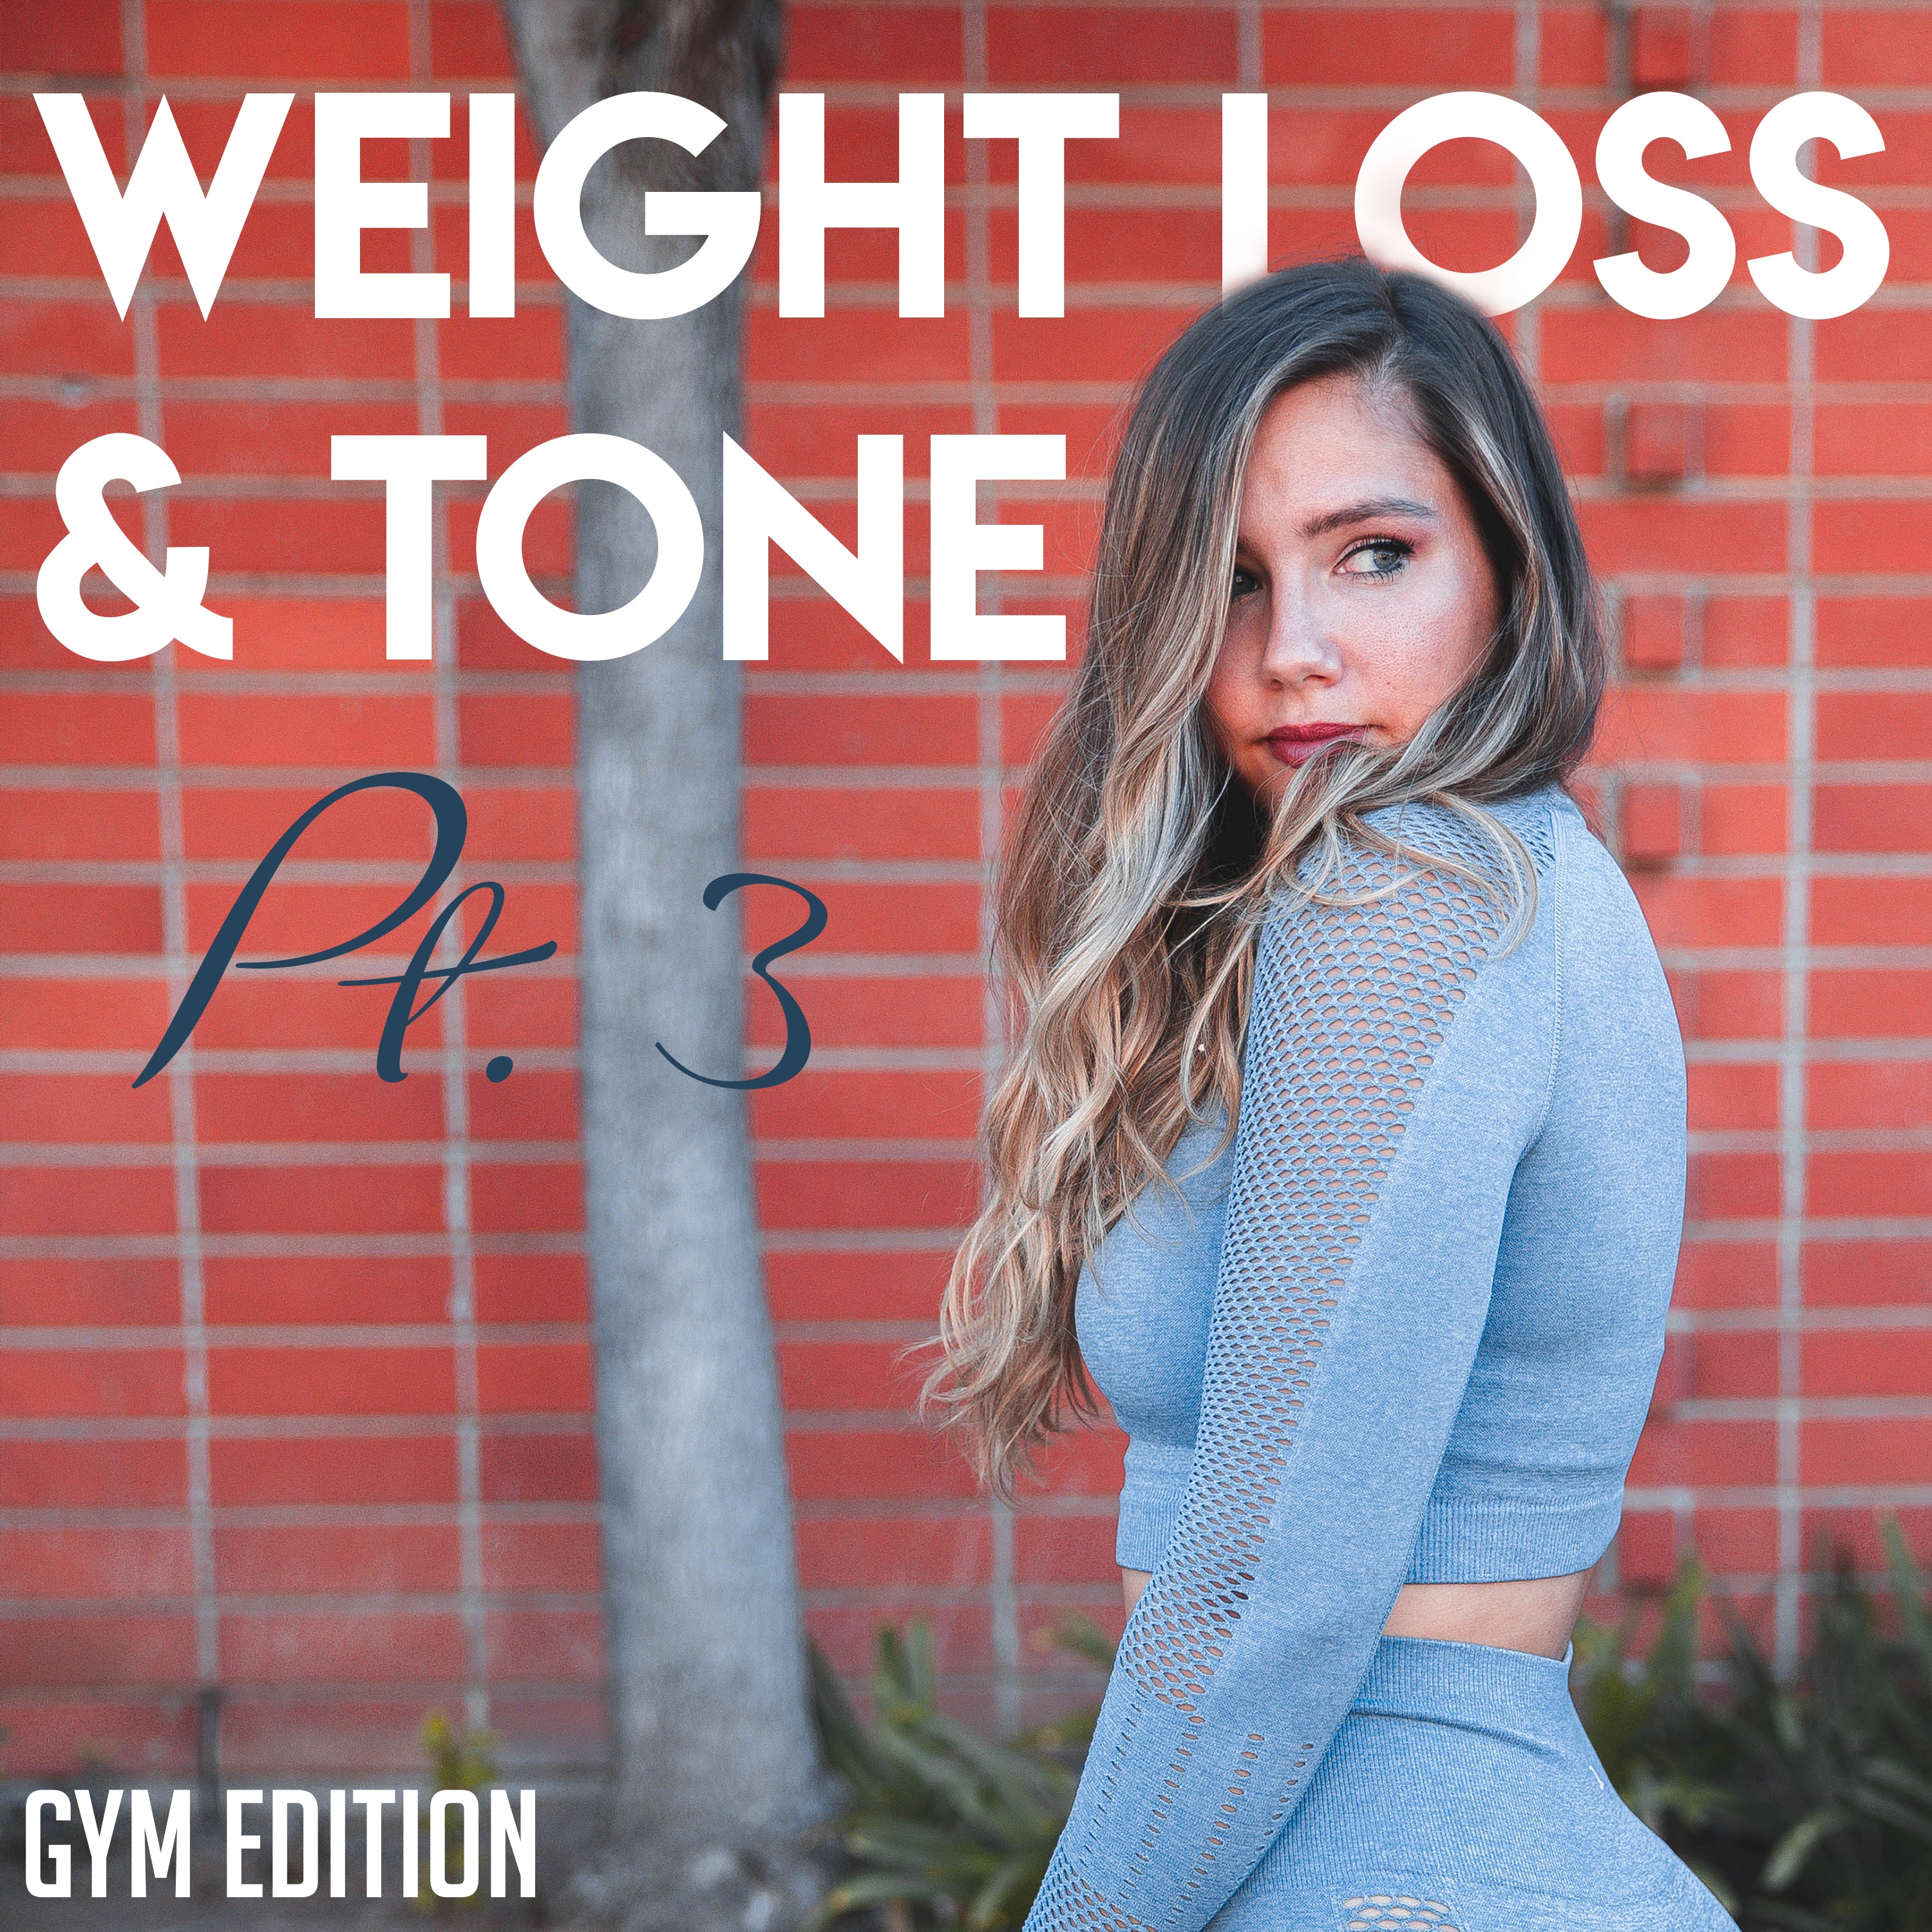 Weight Loss & Tone Pt. 3 *Gym Edition*